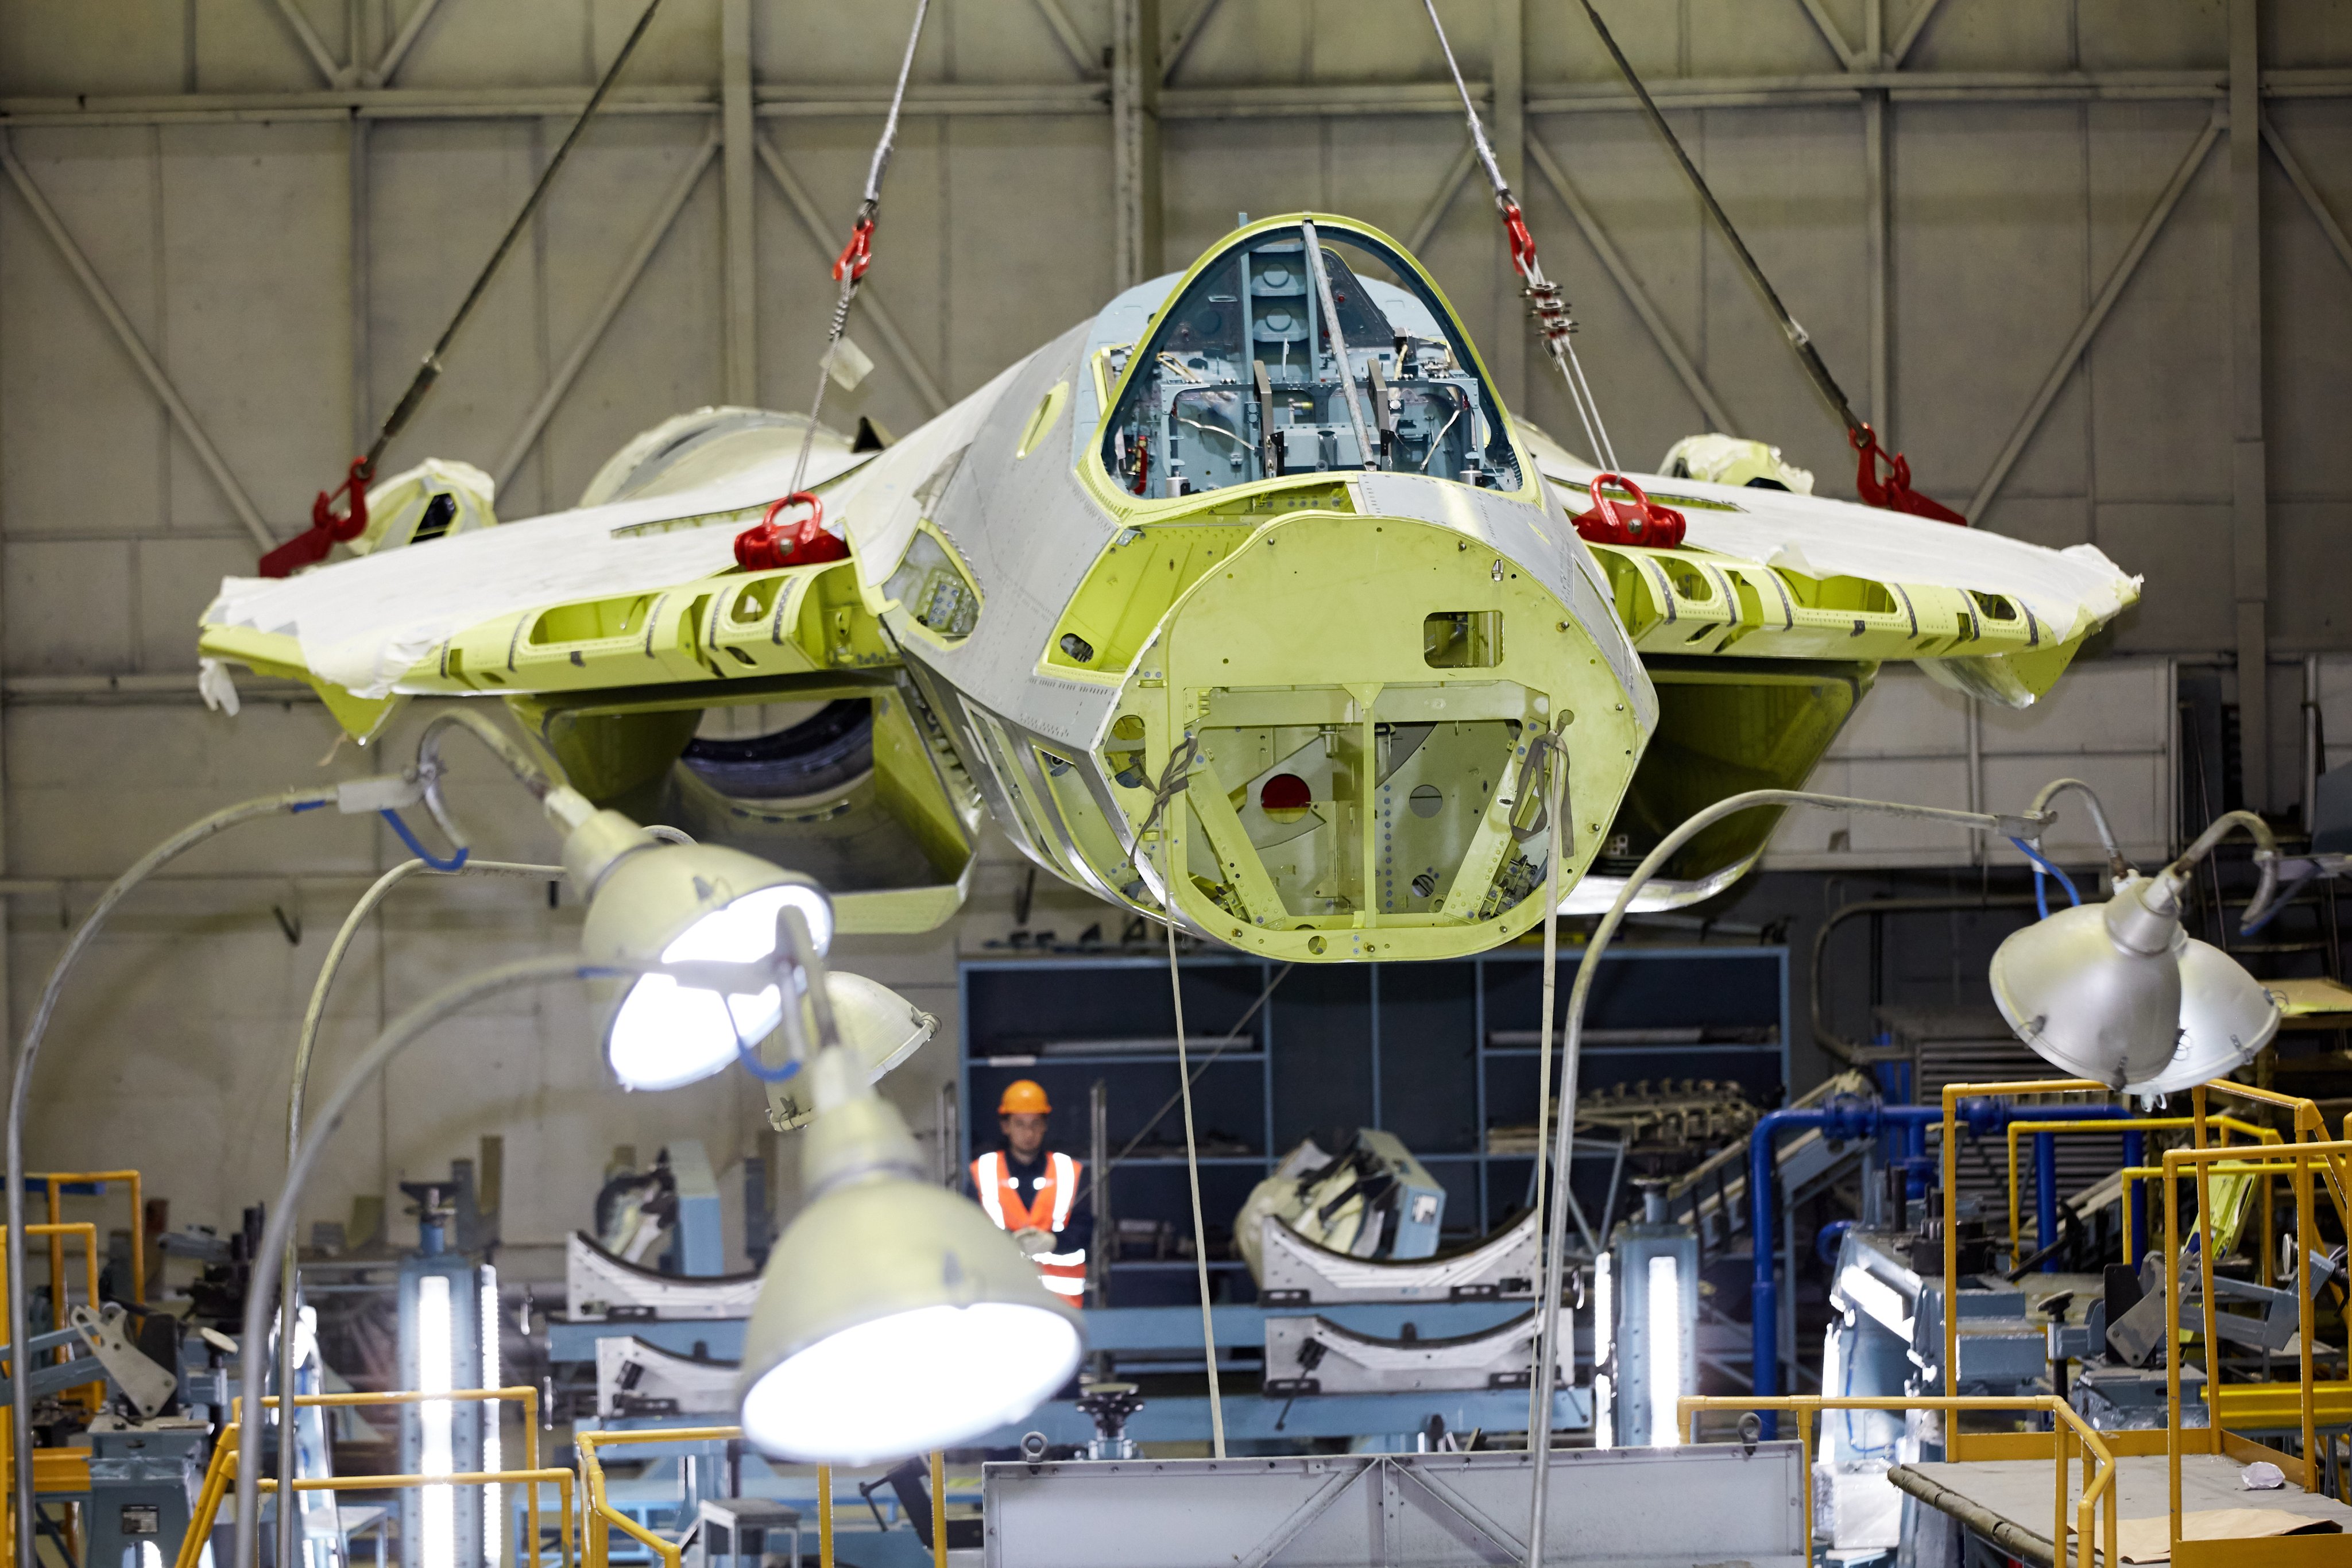 Sukhoi Su-57 at the assembly shop of the Komsomolsk-on-Amur Aircraft Plant